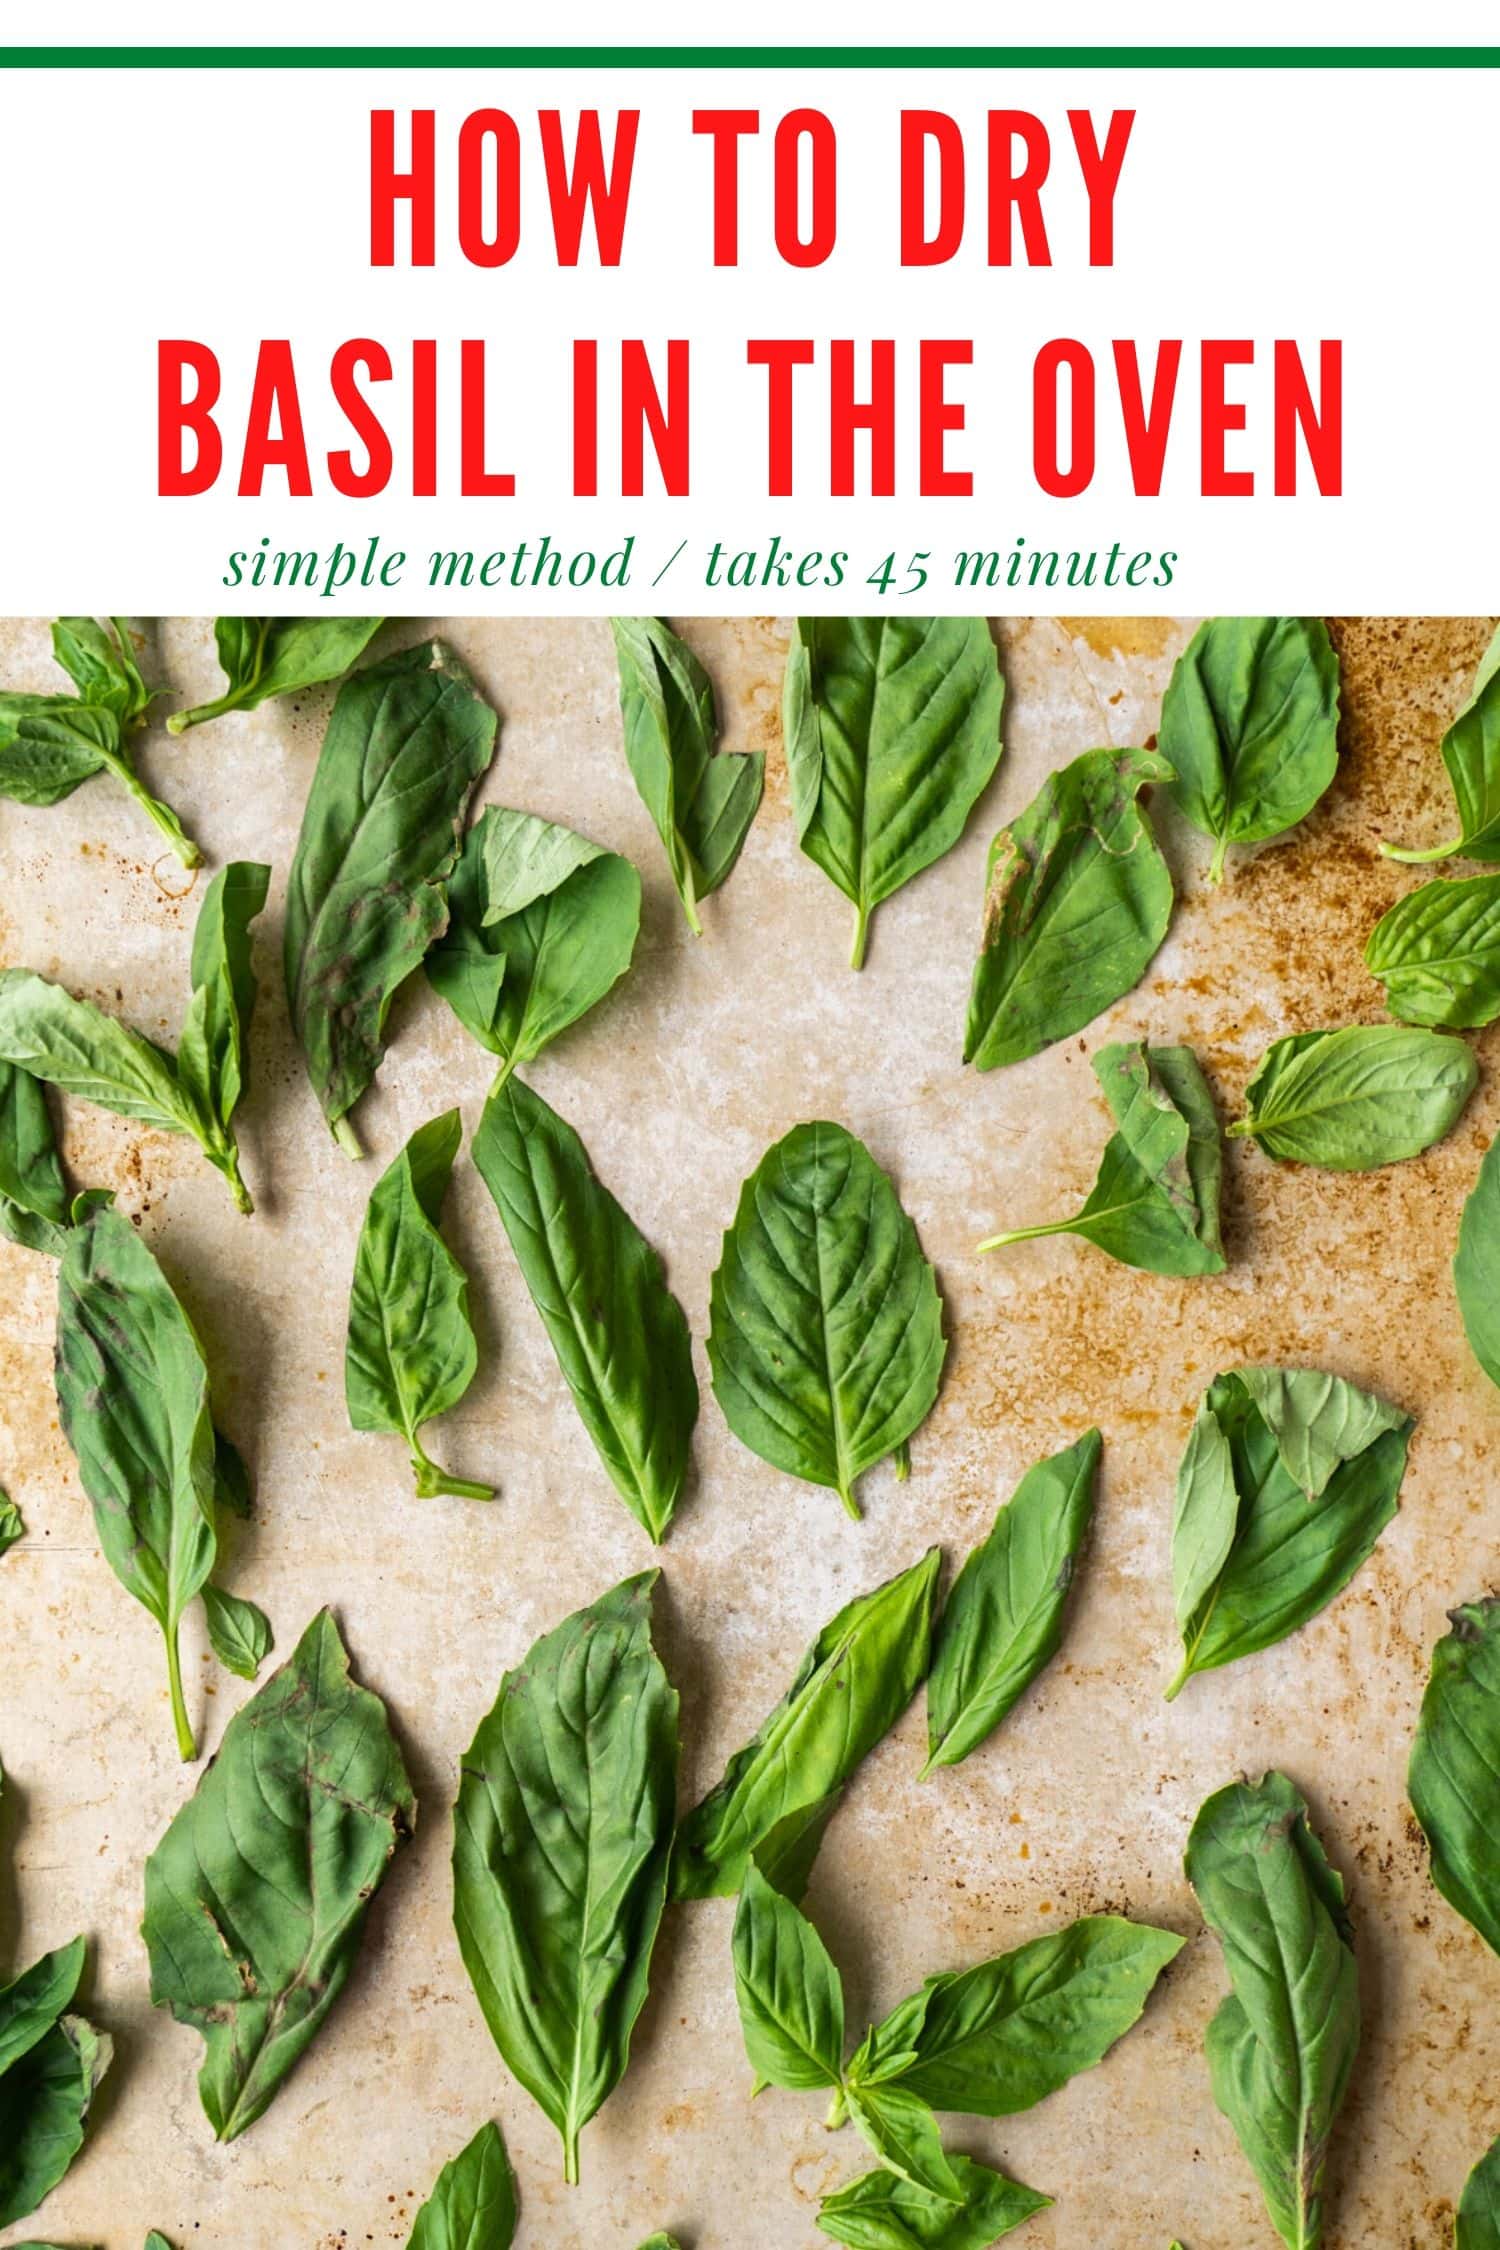 Oven-Dried Basil: A Step-by-Step Guide on How to Dry Out Basil in the ...